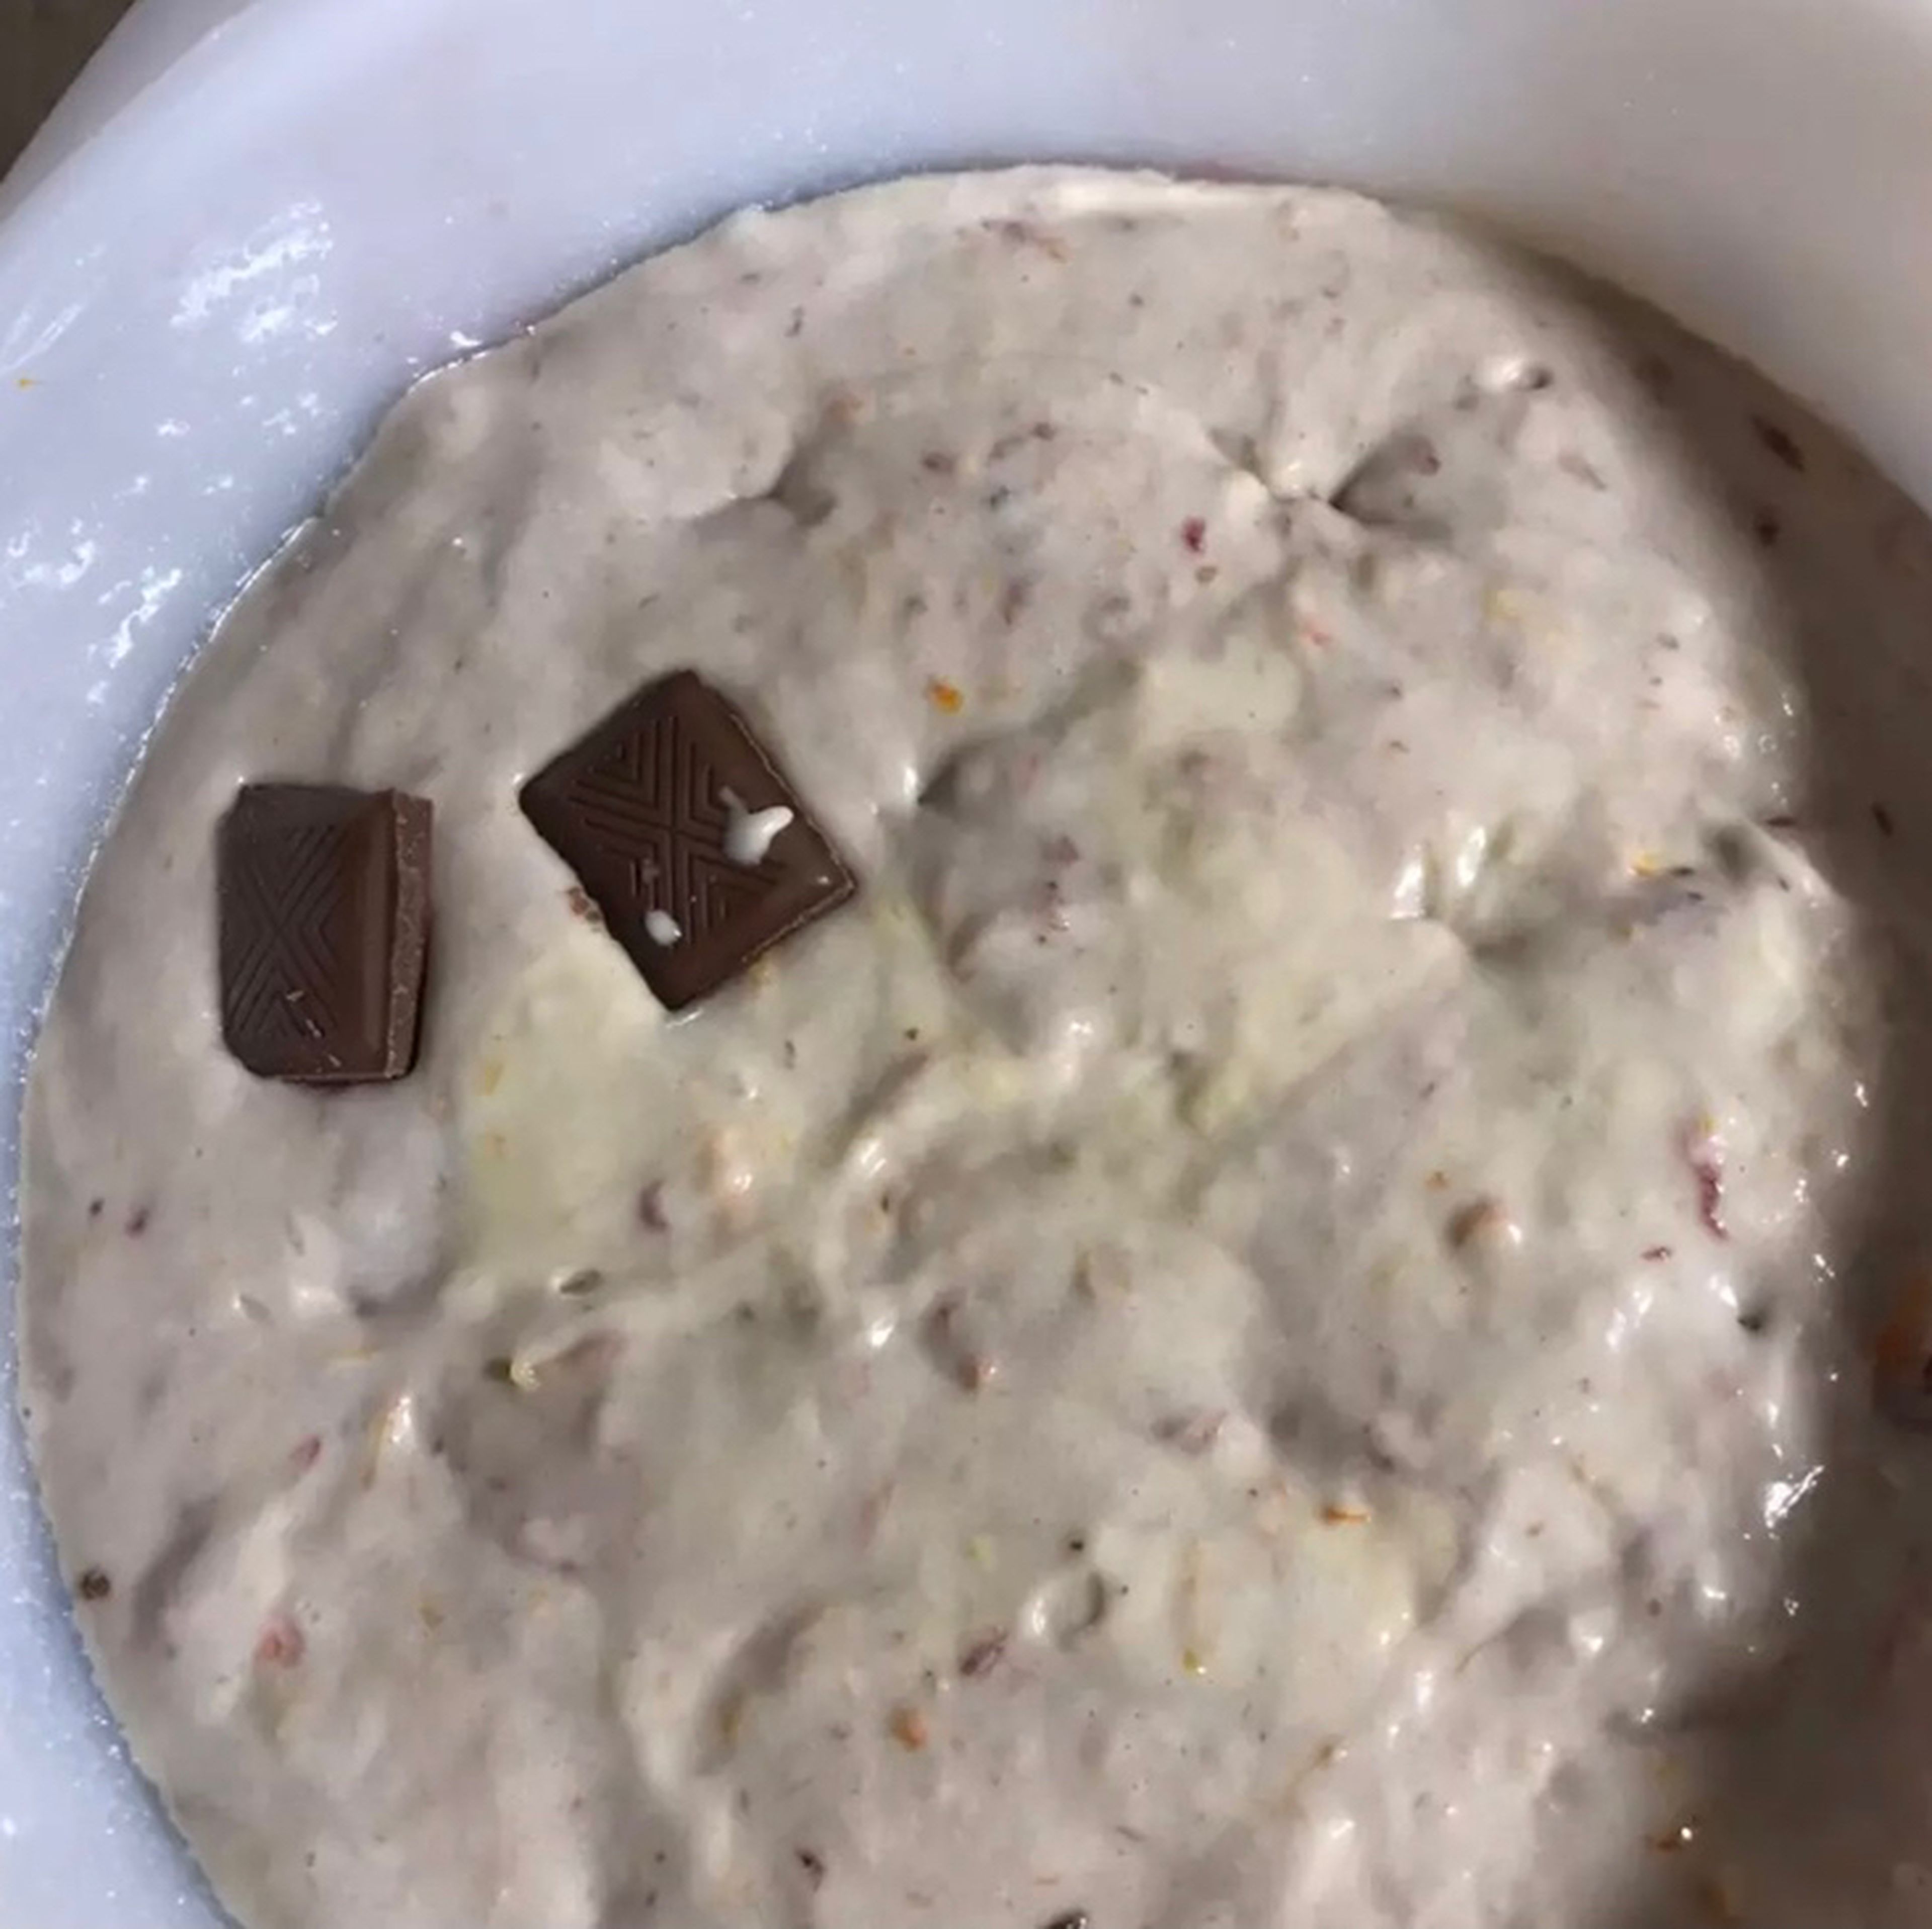 Then put the pieces of chocolate on the mixture and pour the rest of the mixture on the chocolates.